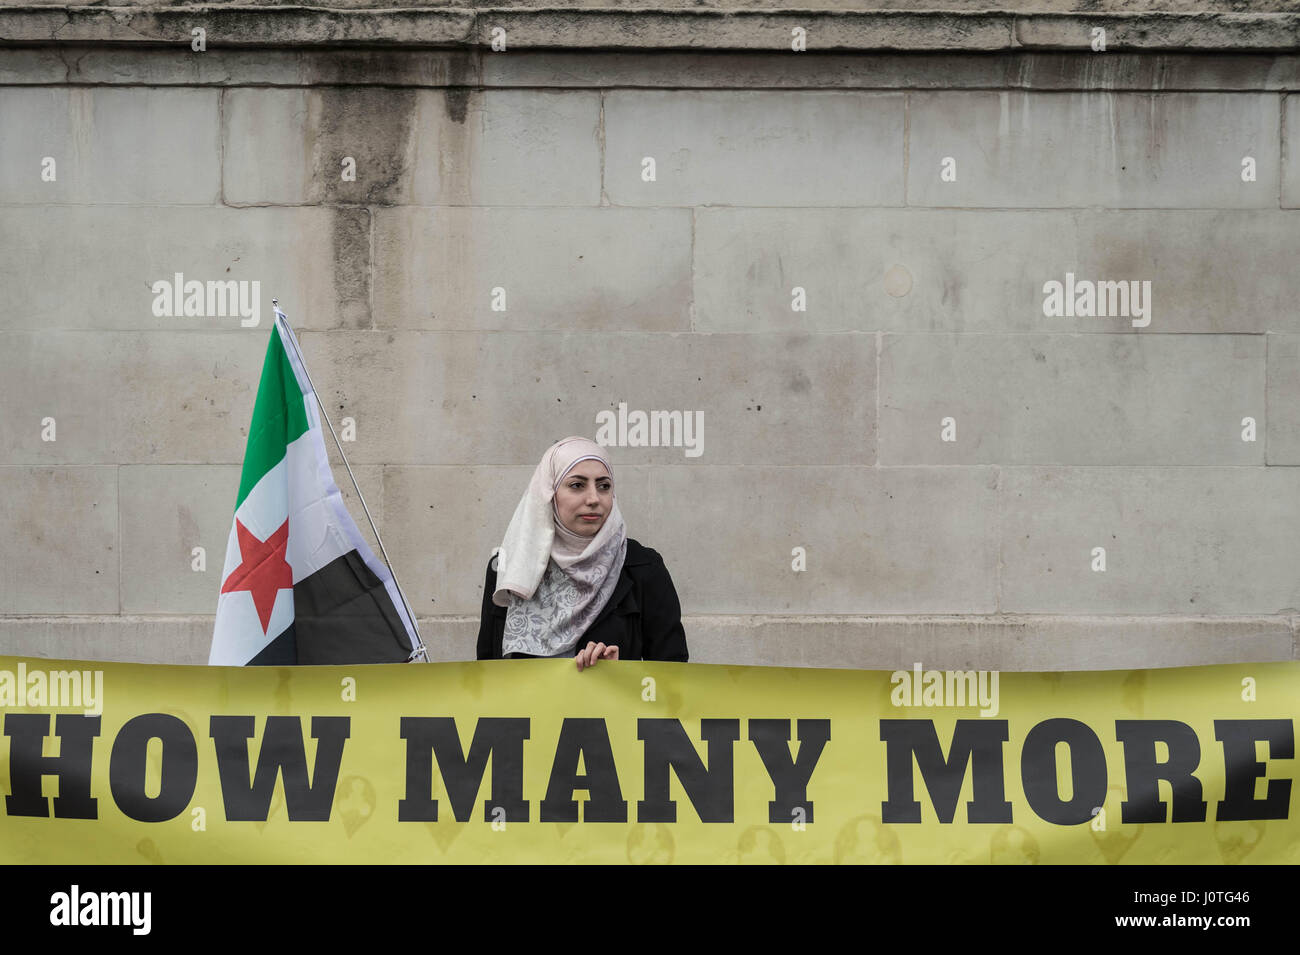 London, UK. 13th April, 2017. Women For Syria Vigil. Women and supporters attend a vigil and rally in Trafalgar Square organised by Syria Solidarity Campaign in the wake of recent atrocities in Syria to call on the British Government to allow more Syrian refugees into the UK. © Guy Corbishley/Alamy Live News Stock Photo